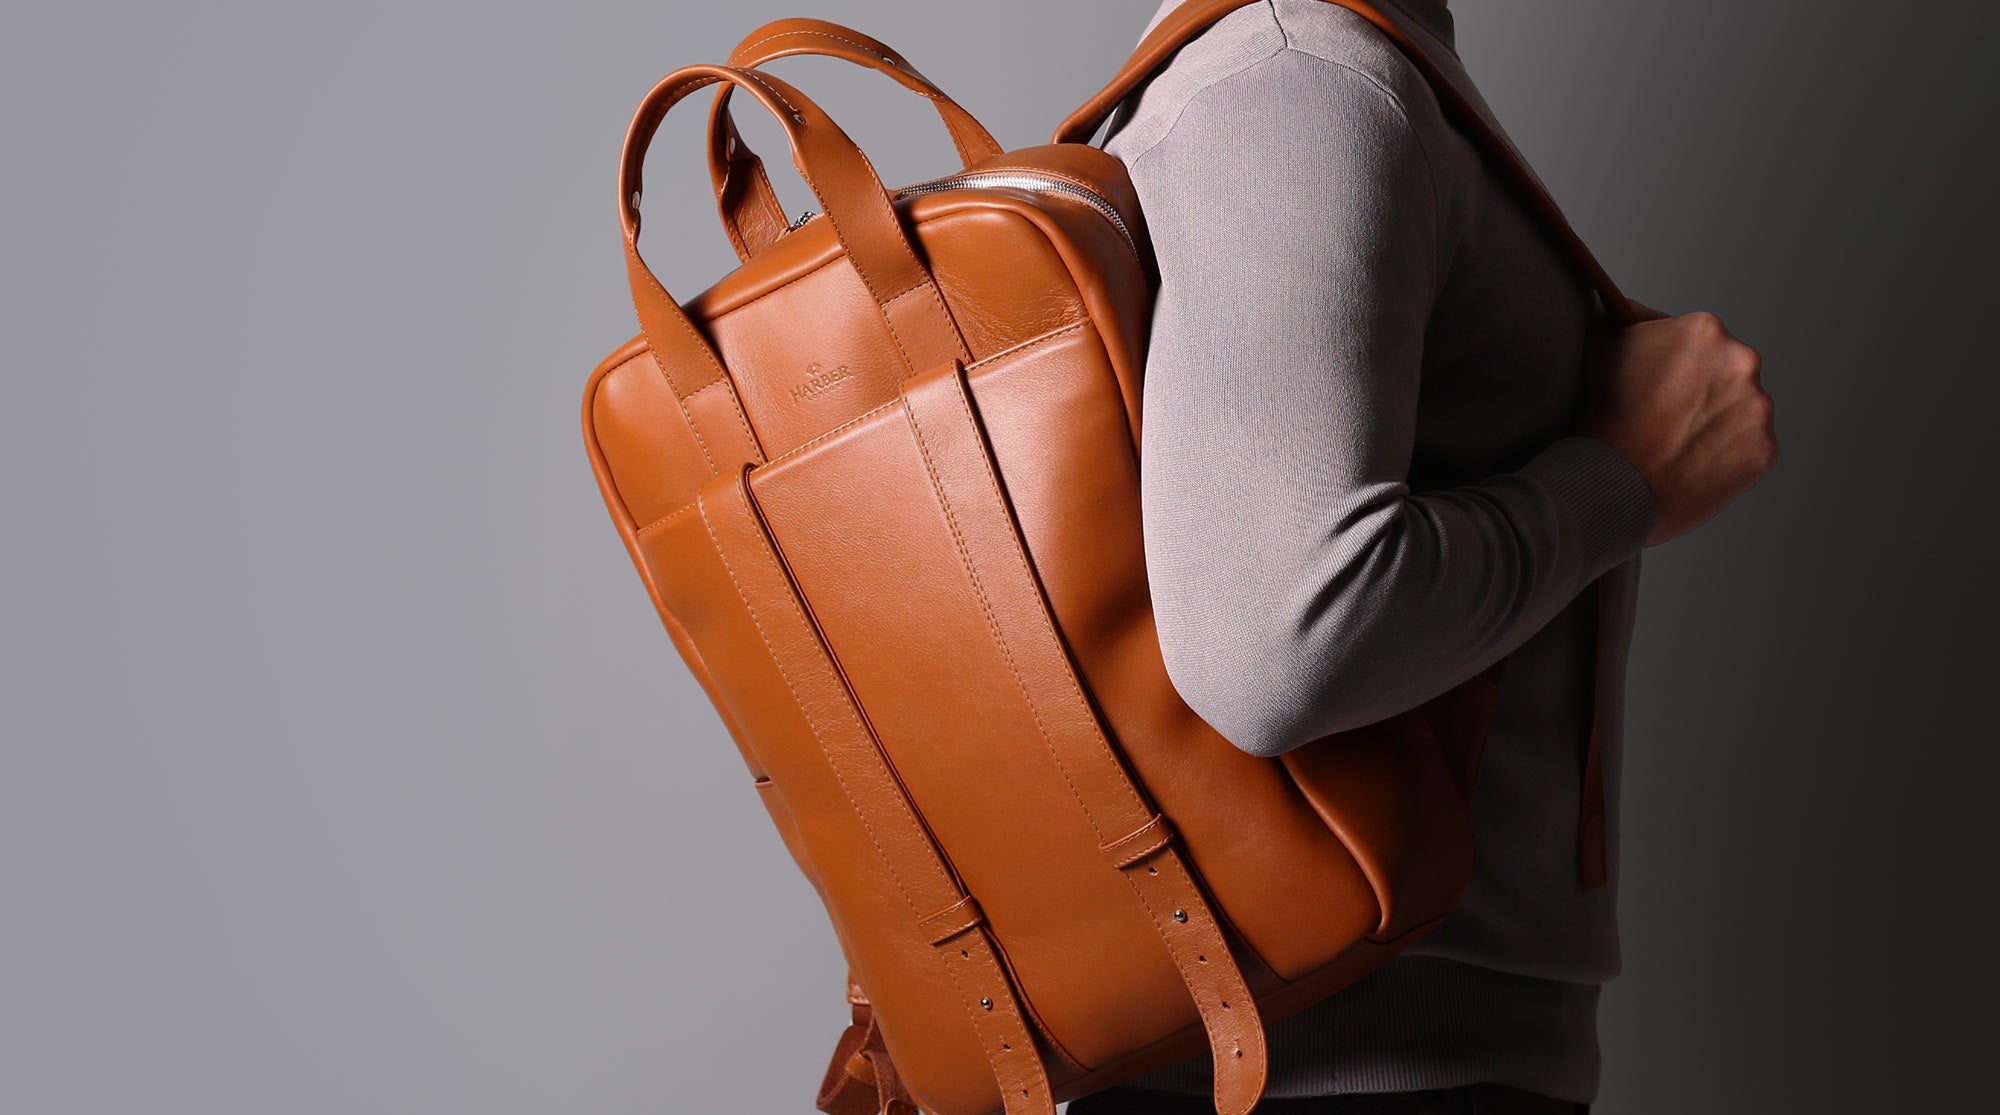 Luxurious Leather Backpack